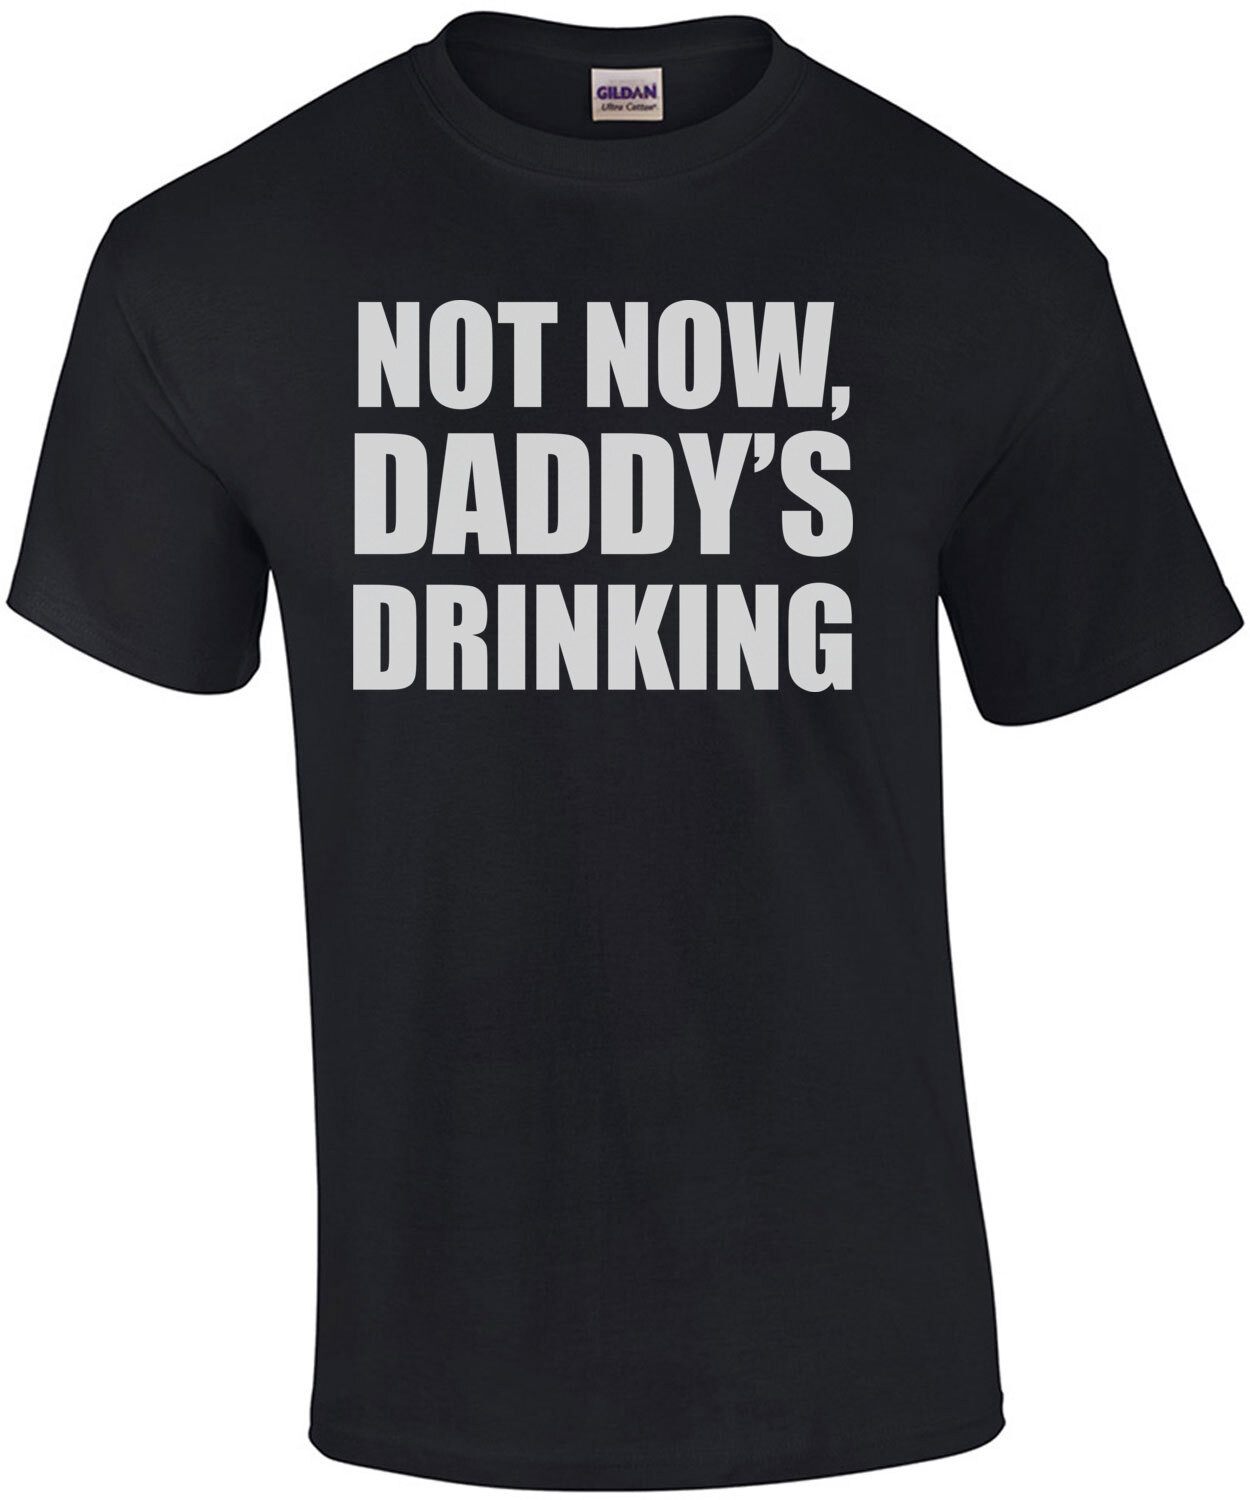 Not now, daddy's drinking. funny drinking t-shirt